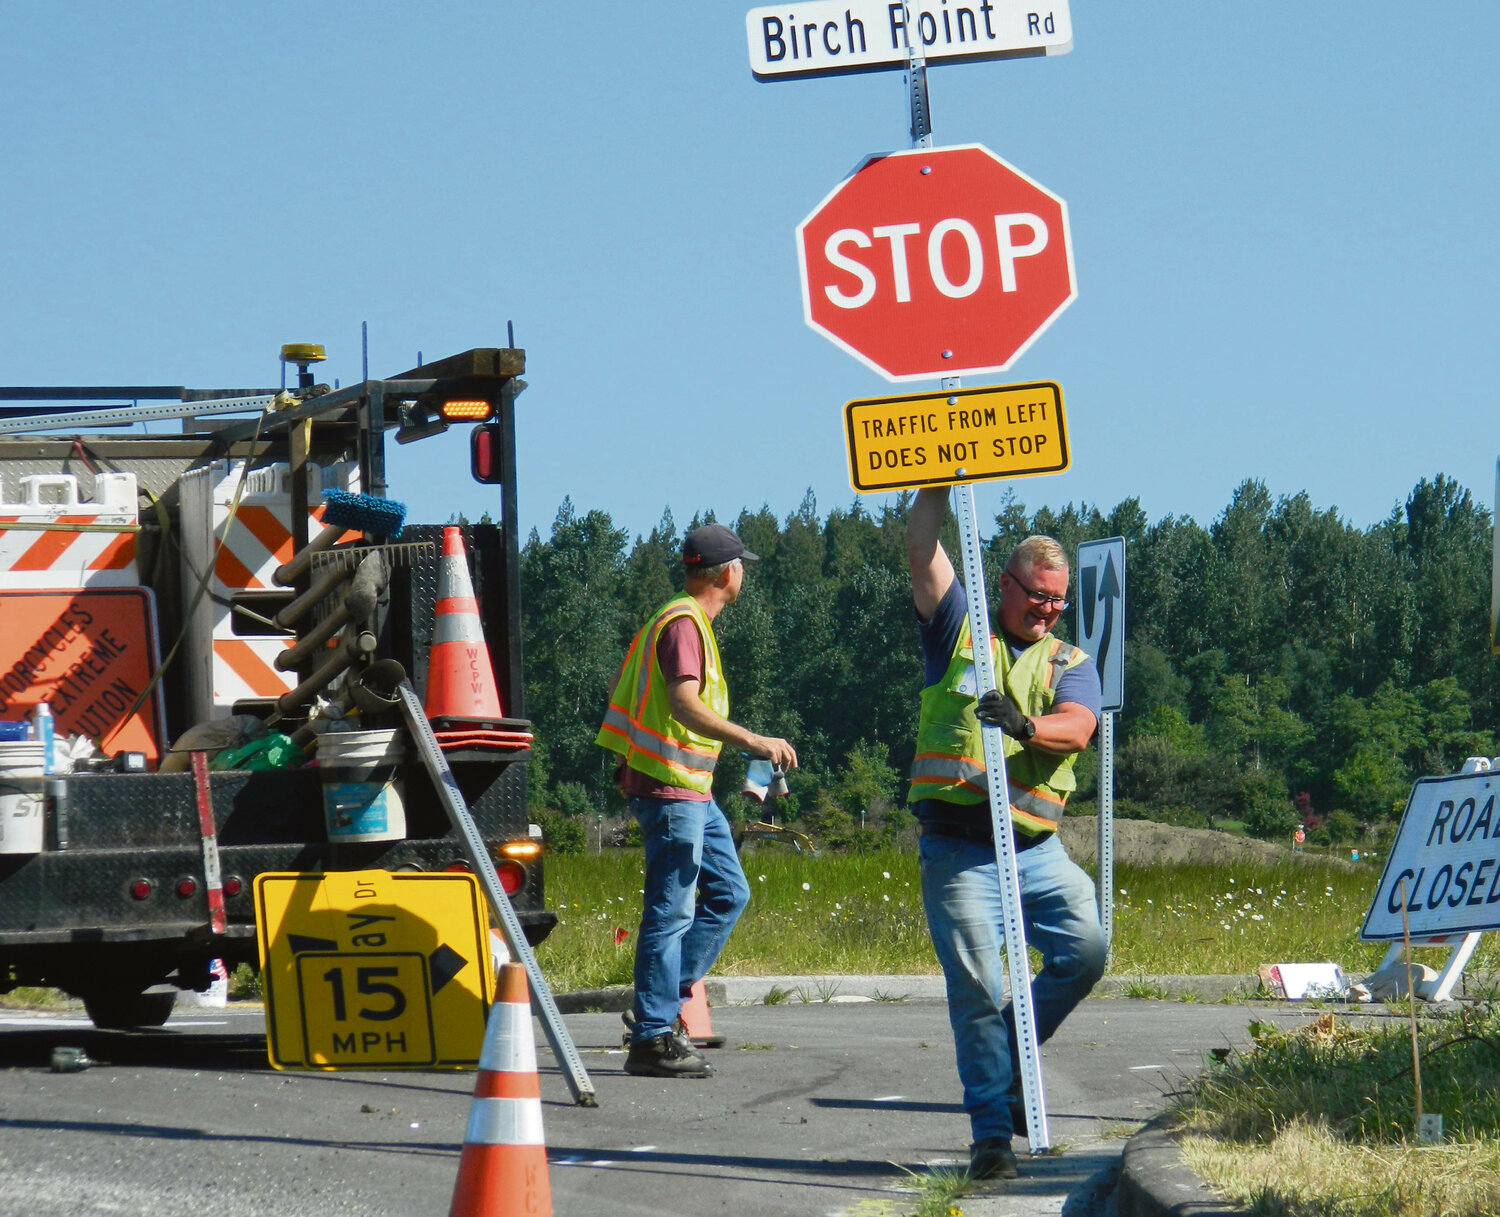 Whatcom County Public Works Department employees installed two stop signs at the intersection of Birch Bay Drive and Birch Point Road on June 6 despite Birch Bay residents having voiced strong opposition to the signs earlier this year. The signs were put up for southbound traffic exiting the new Horizon development on Birch Point Road and westbound traffic on Birch Bay Drive, at the top of the curve near the intersection. Eastbound traffic on Birch Bay Drive will have the right-of-way.